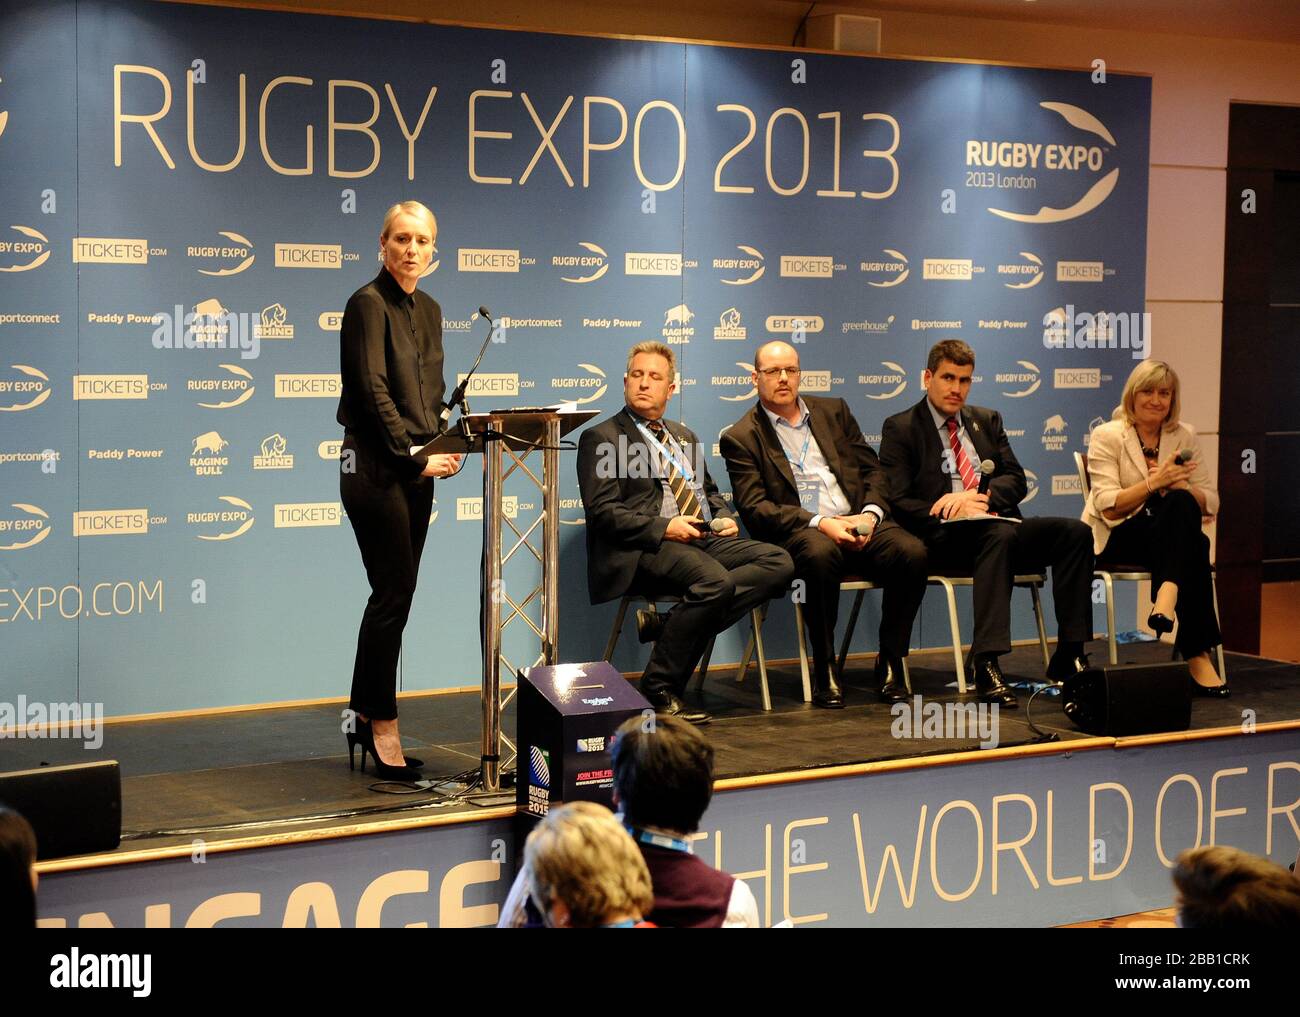 Moderator Sonja McLaughlan hosts the Plenary session on Business Opportunities from the RWC 2015 with Andrew Geary of Milton Keynes Council , Mick Hogan of MMG Sport, Dan Jones of Deloitte and Debbie Jevans of England Rugby 2015 during day one of the Rugby Expo 2013 at Twickenham Stadium Stock Photo